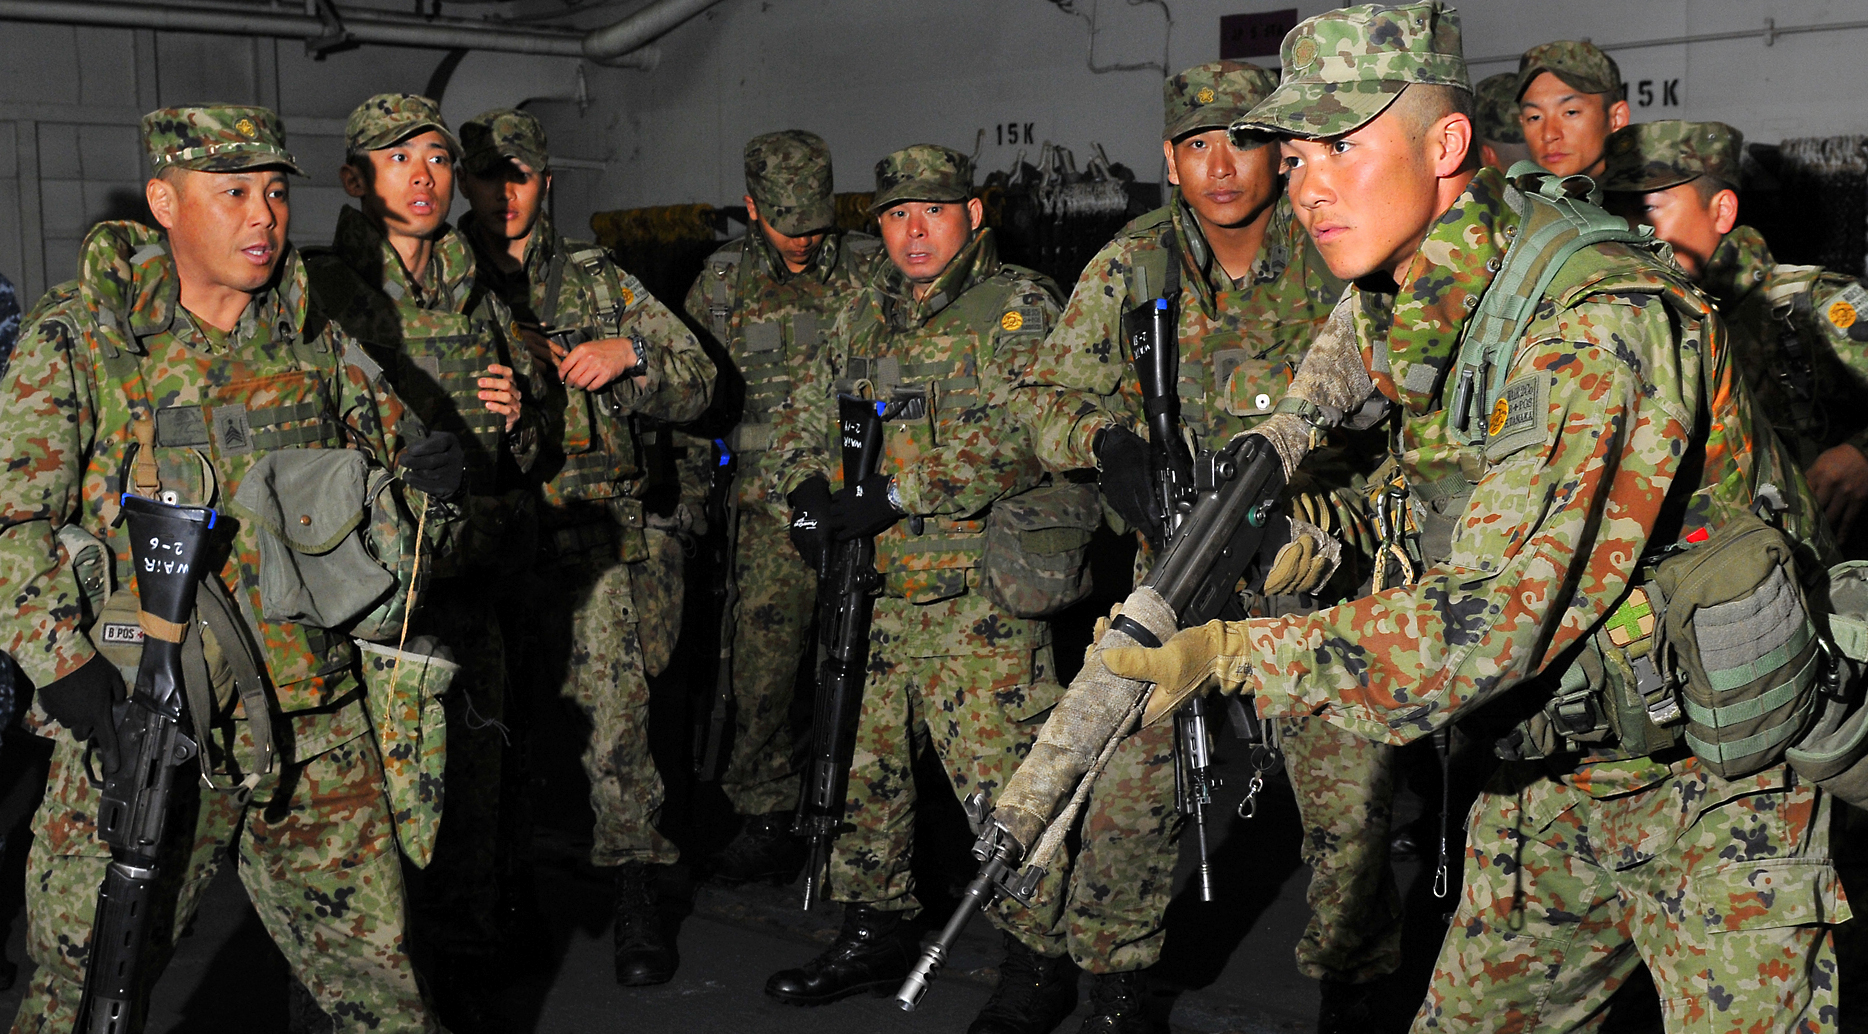 Japan Ground Self-Defense Force conduct small arms weapons training aboard the amphibious assault ship USS Peleliu (LHA-5) in 2012. US Navy Photo